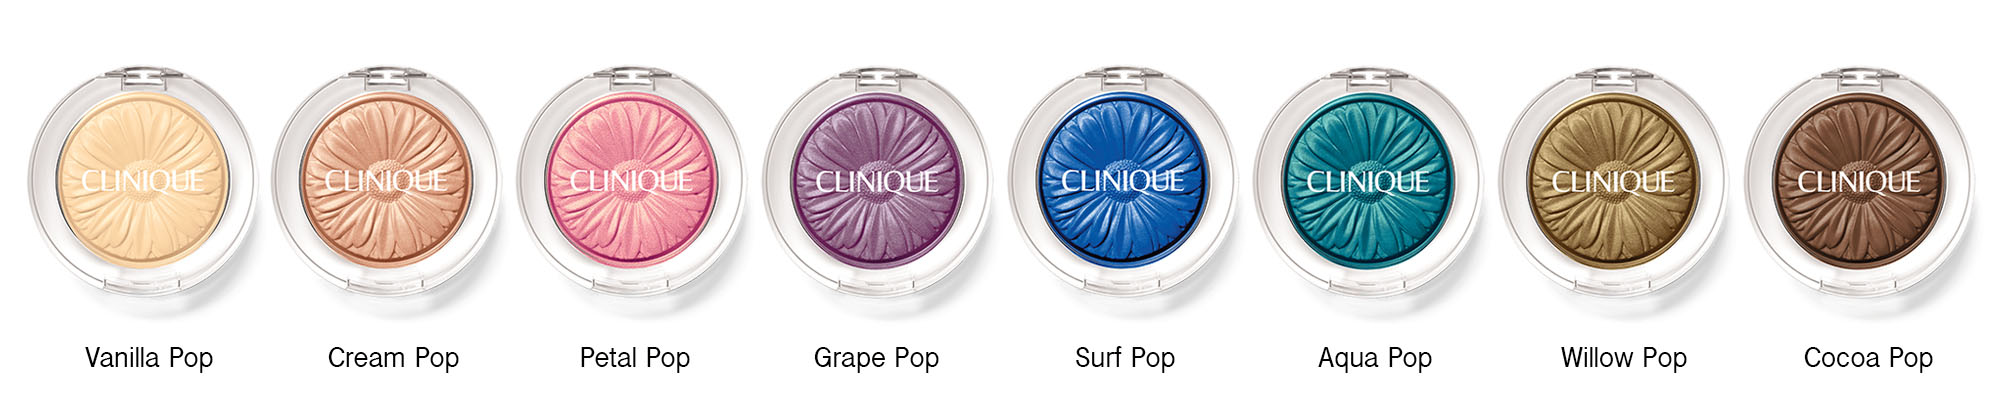 CLINIQUE Lid Pop Eyeshadow Swatches Review (Cream Pop Cocoa Pop)